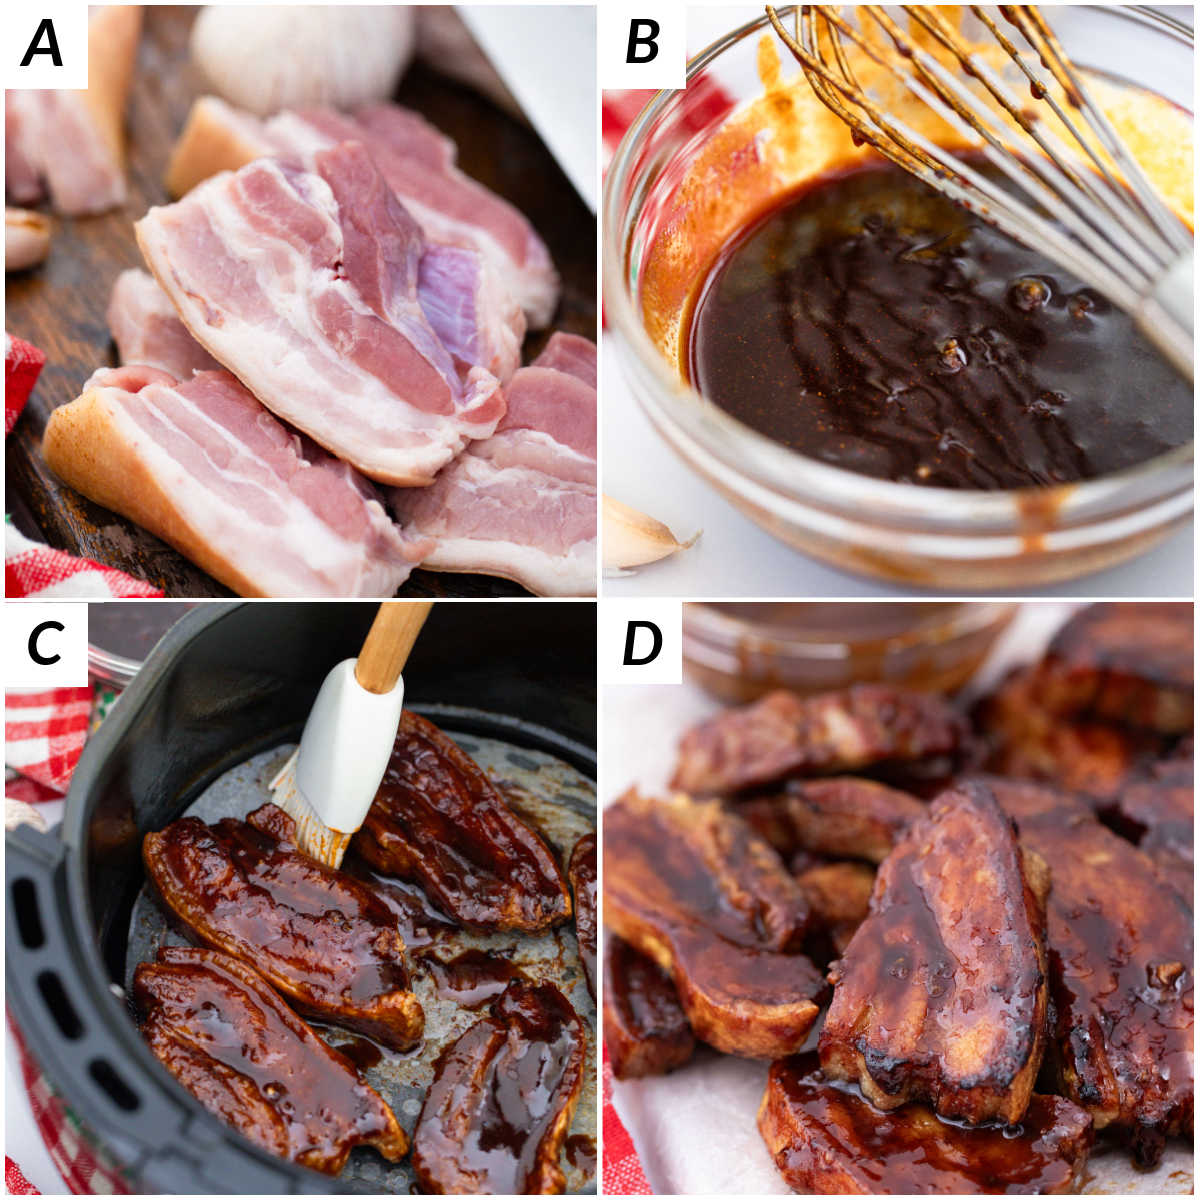 image collage showing the steps for making Air Fryer Pork Belly